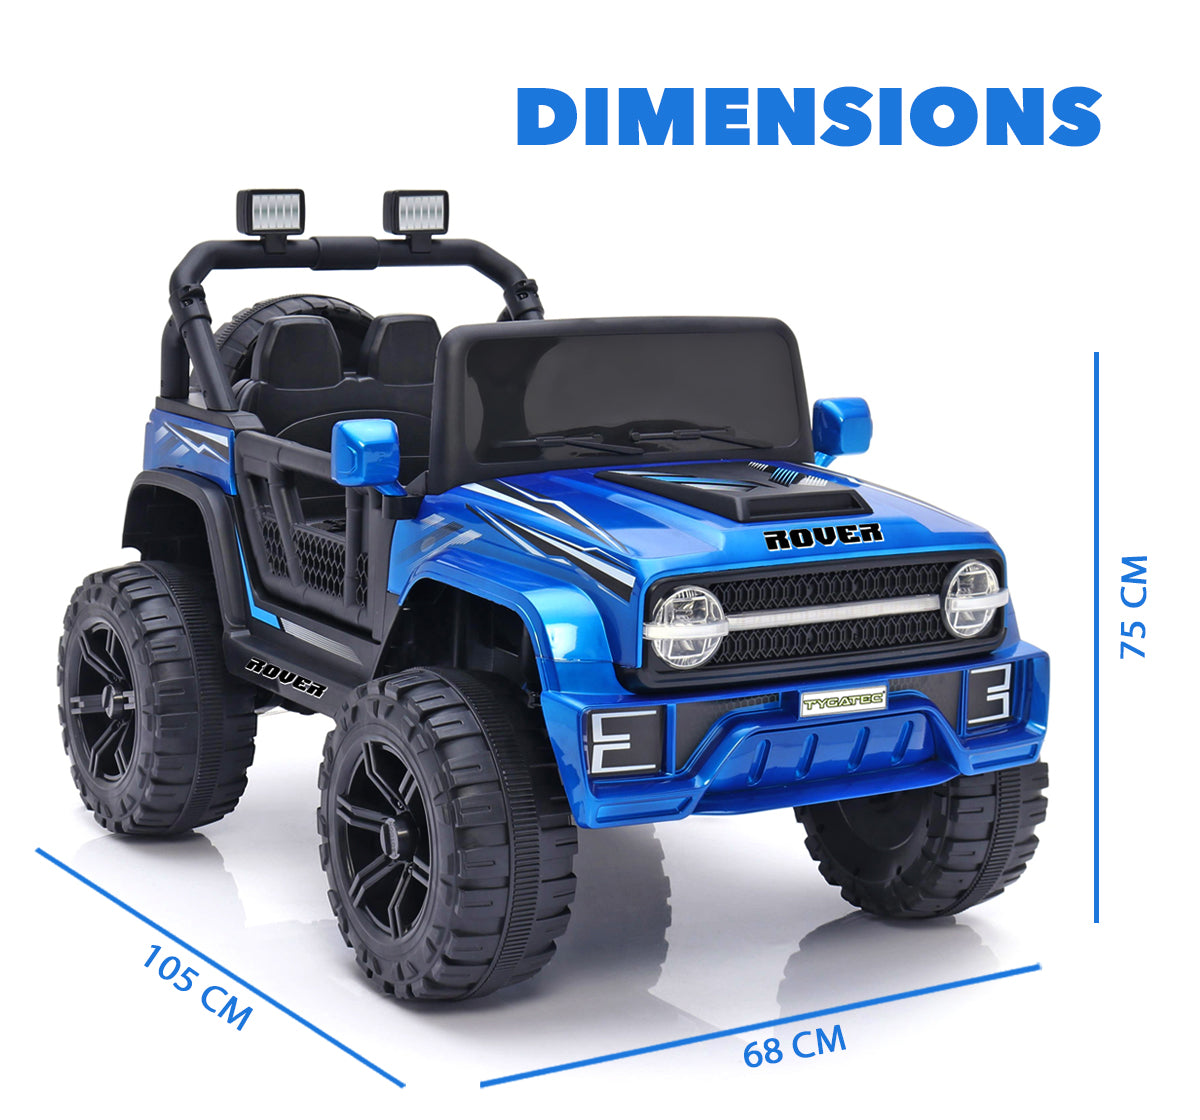 Tygatec Ride-on Kids Car Ground Force ROVER (BLUE COLOUR)